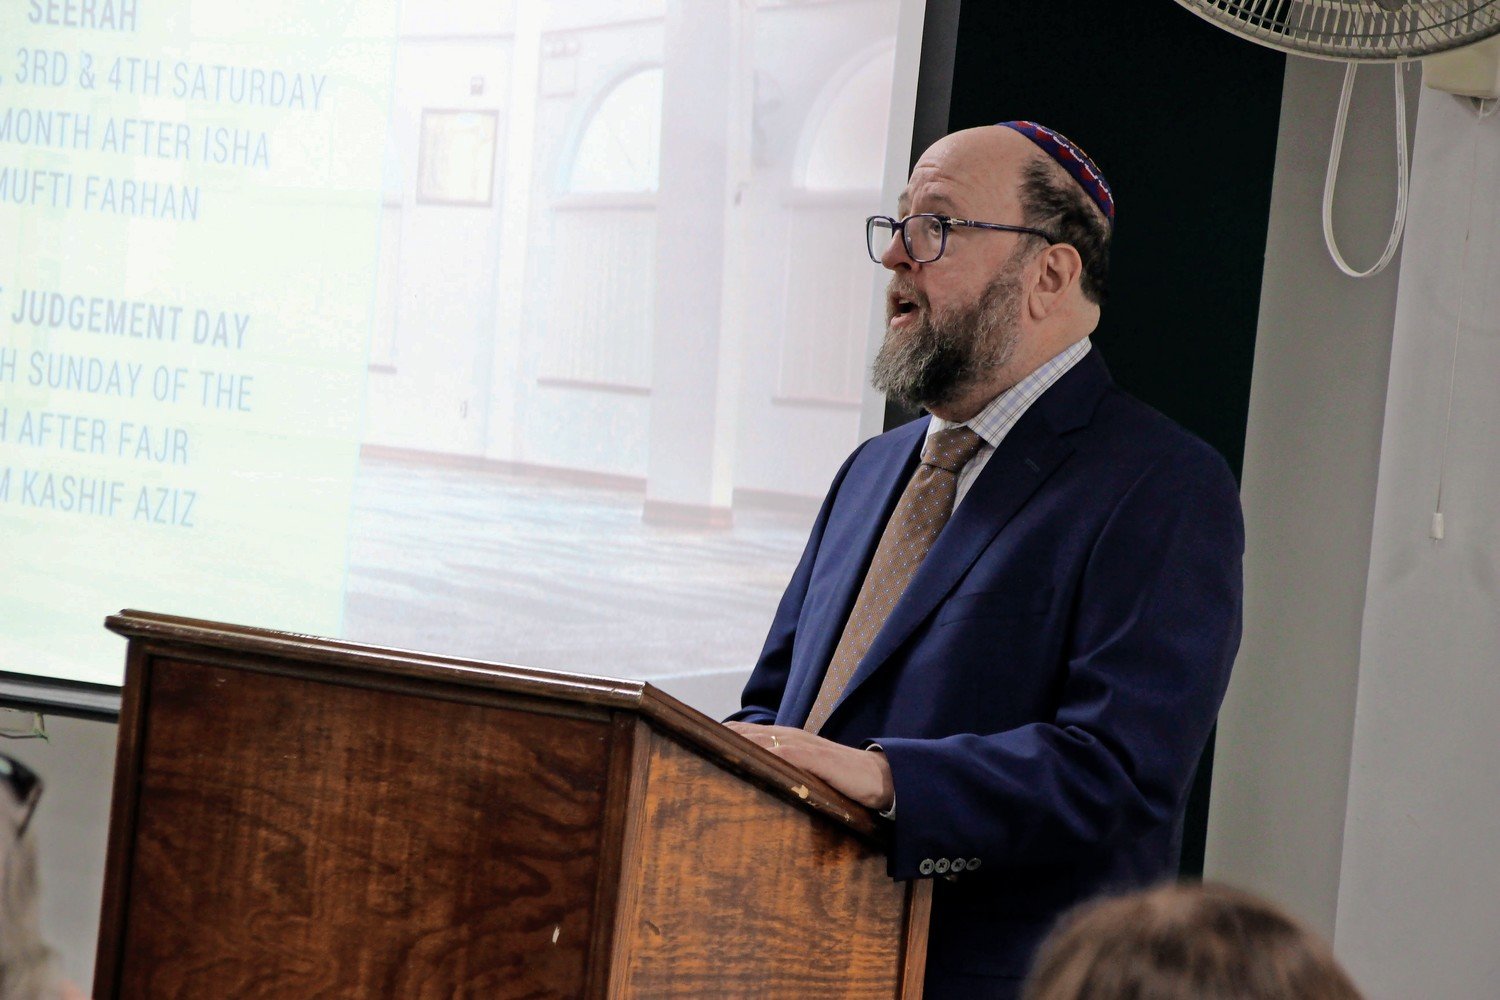 Rabbi Andrew Warmflash, of the Hewlett-East Rockaway Jewish Centre, said he was surprised to see such hatred in New York, but added that it was imperative for Jewish people to celebrate their faith.